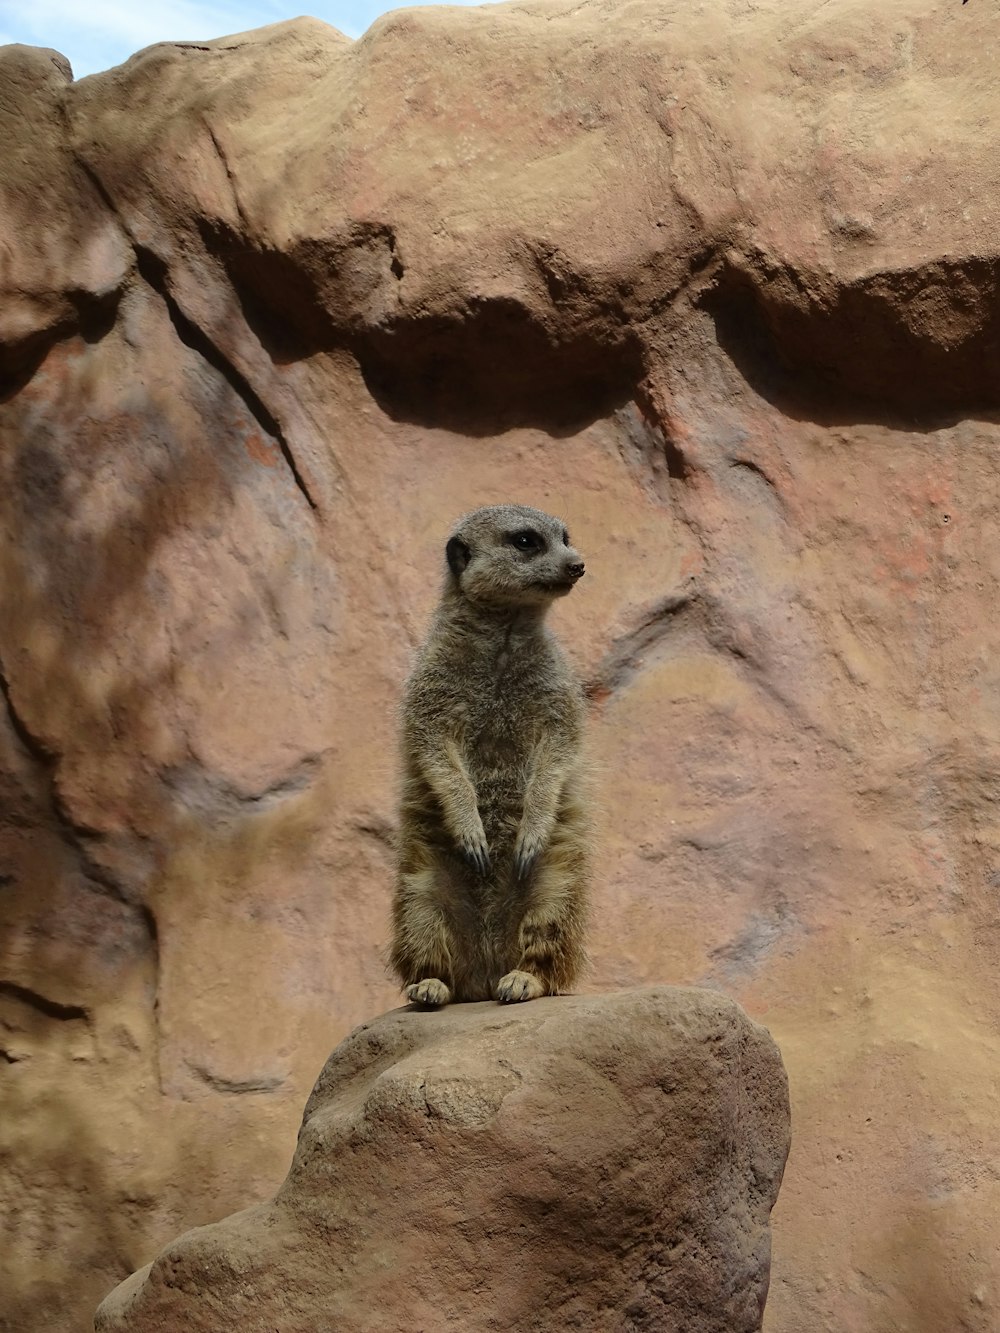 a small animal standing on a rock